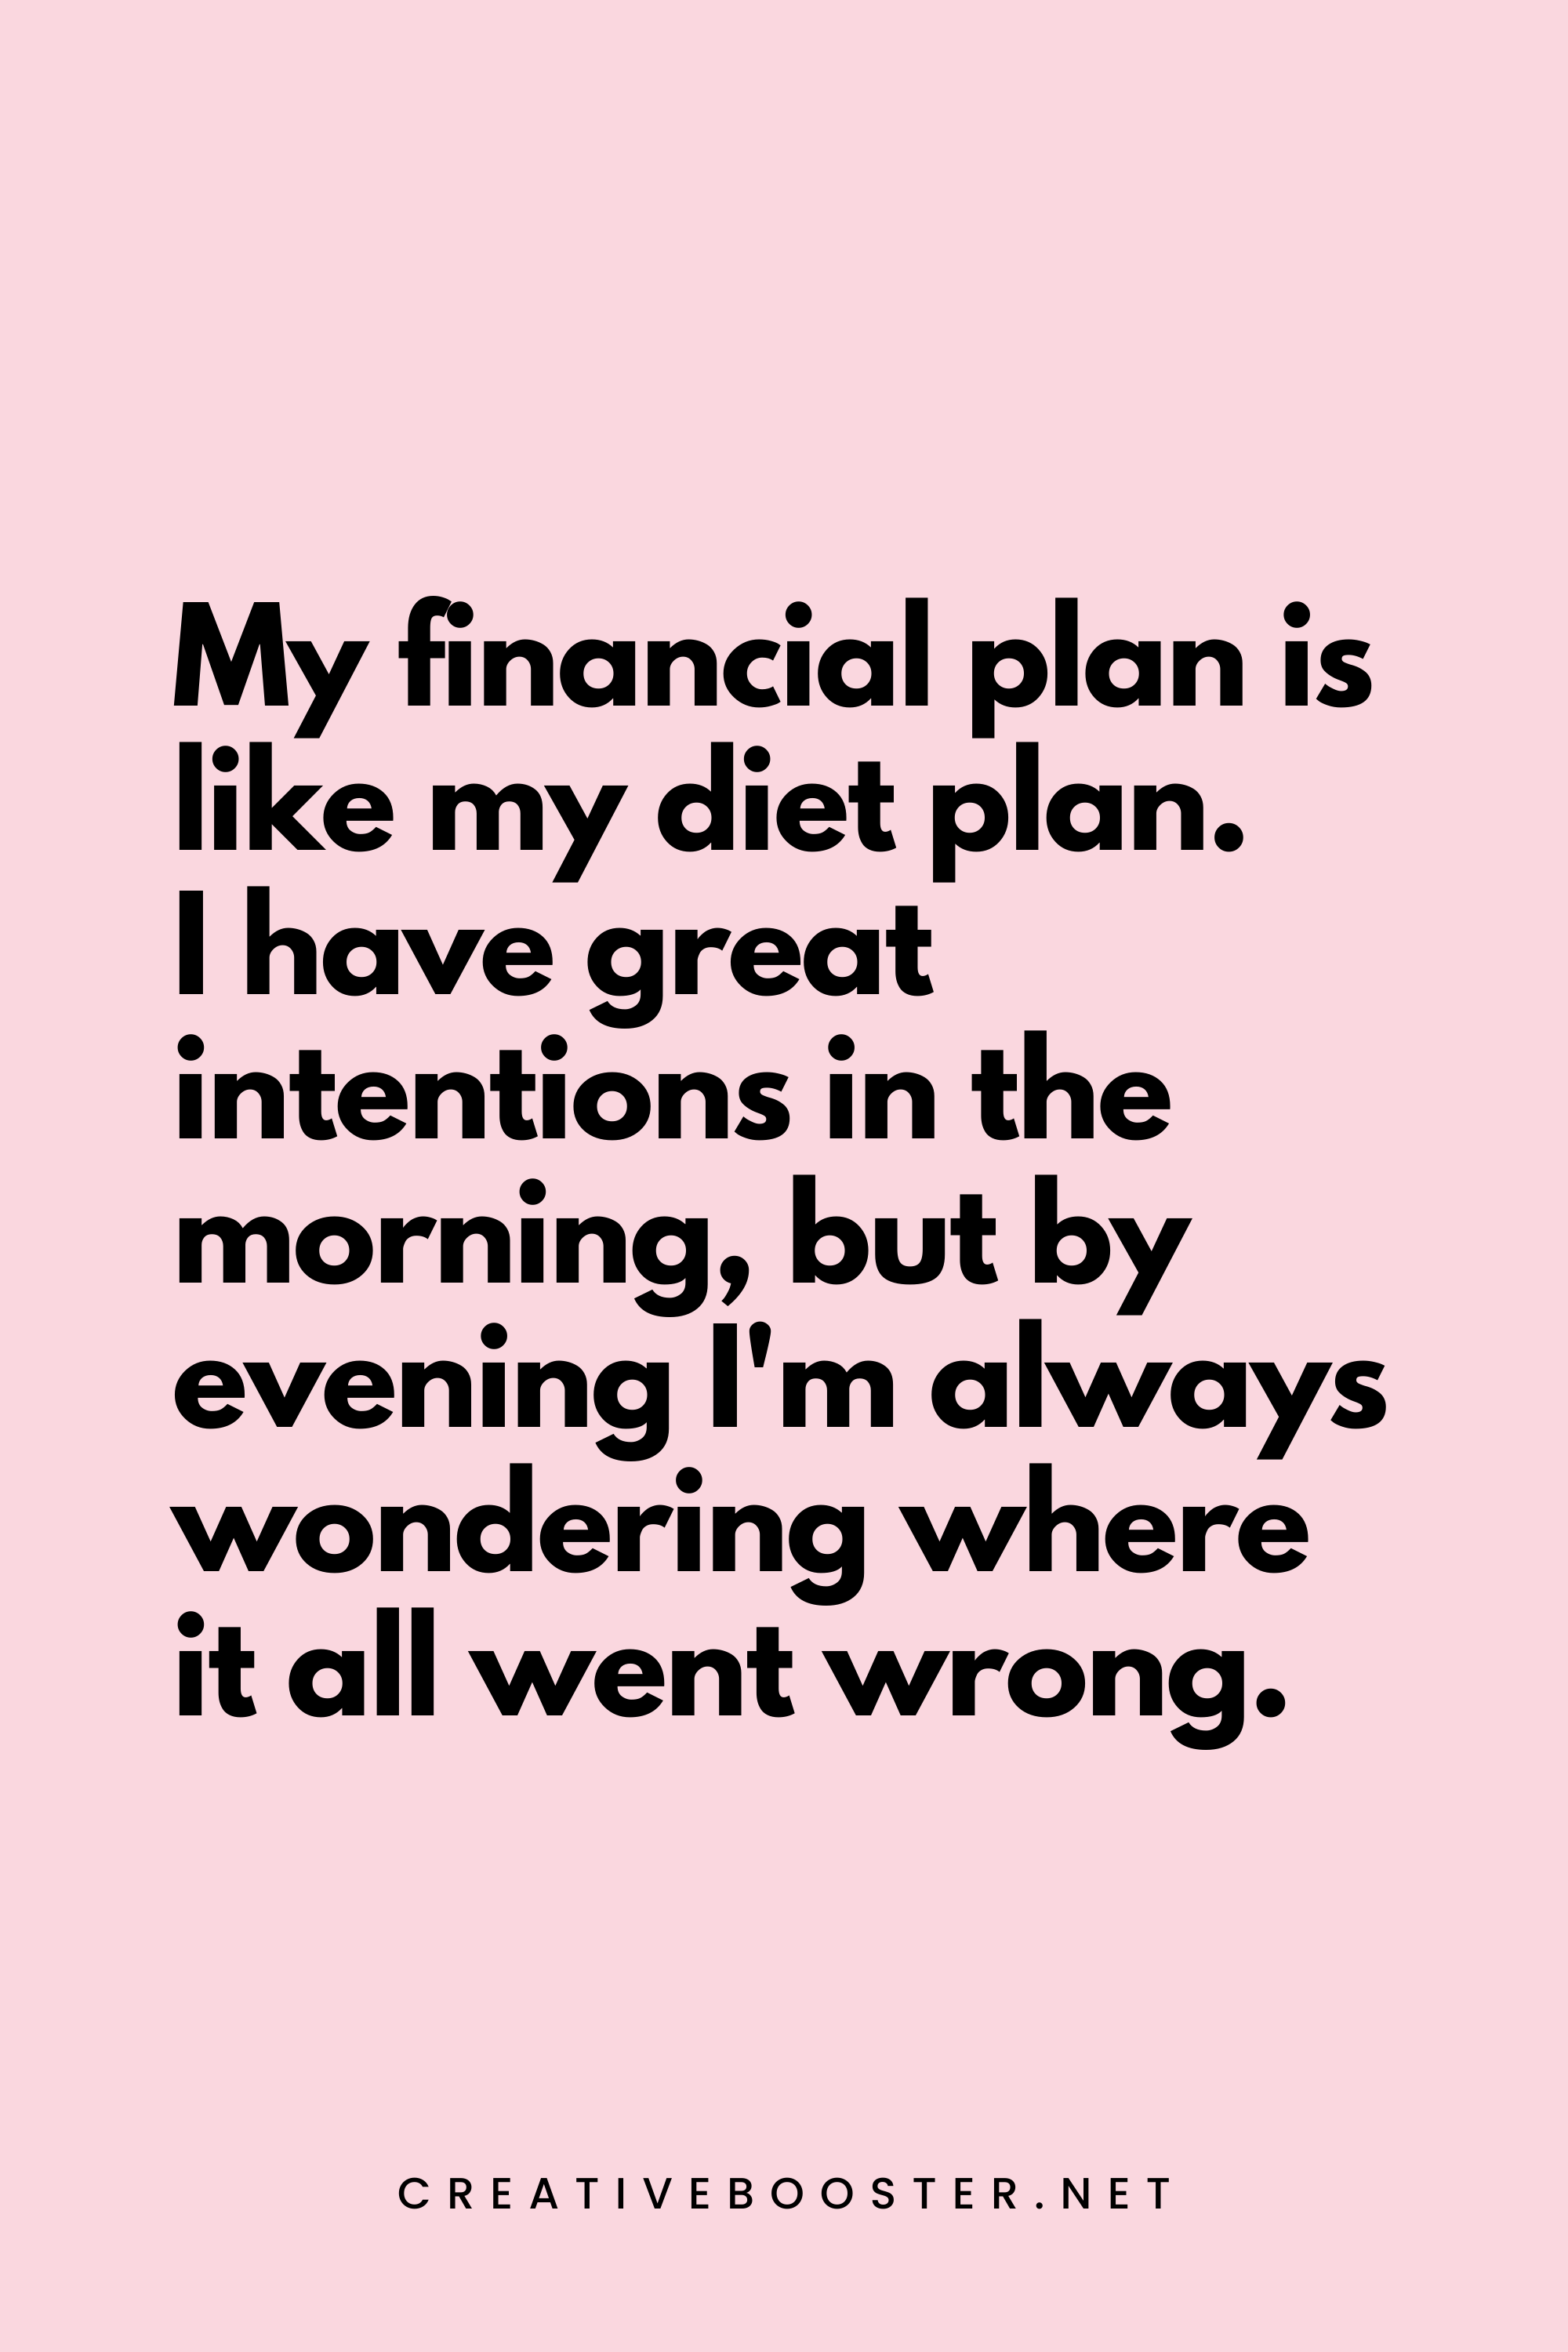 66. My financial plan is like my diet plan. I have great intentions in the morning, but by evening I'm always wondering where it all went wrong. - Creativebooster.net - 6. Funny Financial Freedom Quotes